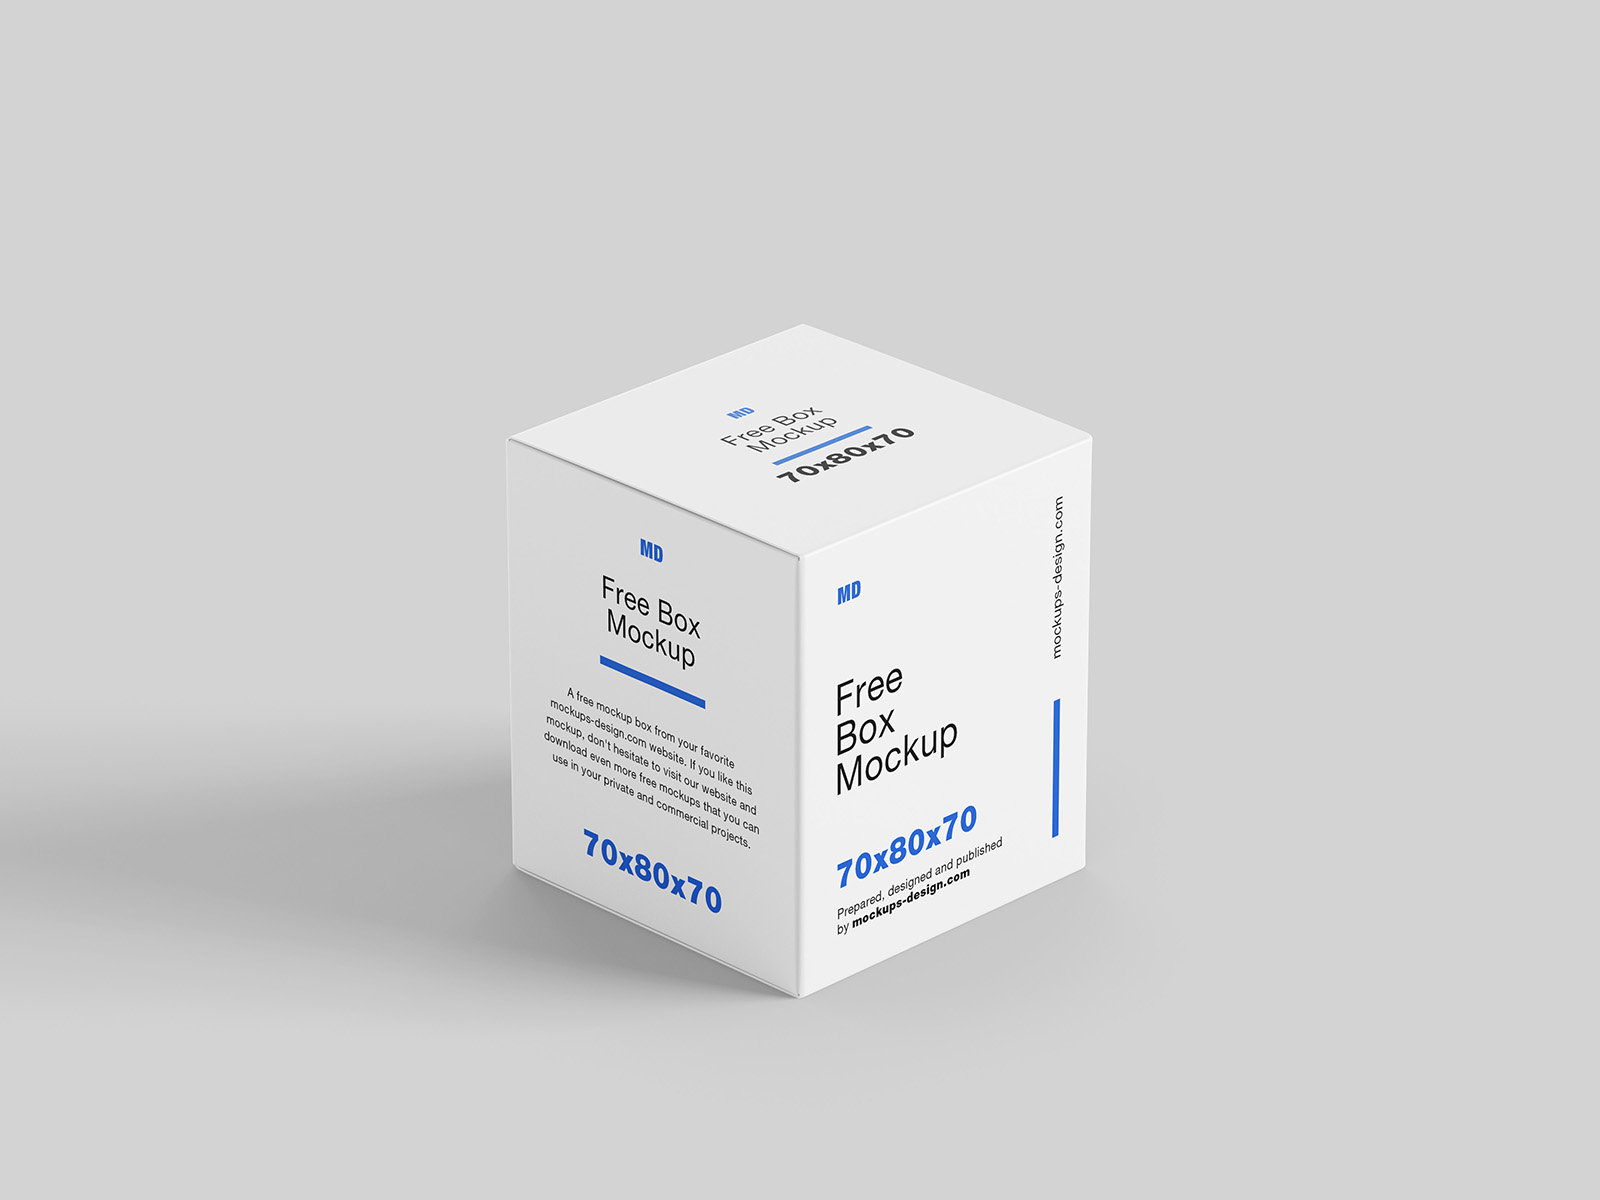 5 Scenes from the Packaging Box Mockup